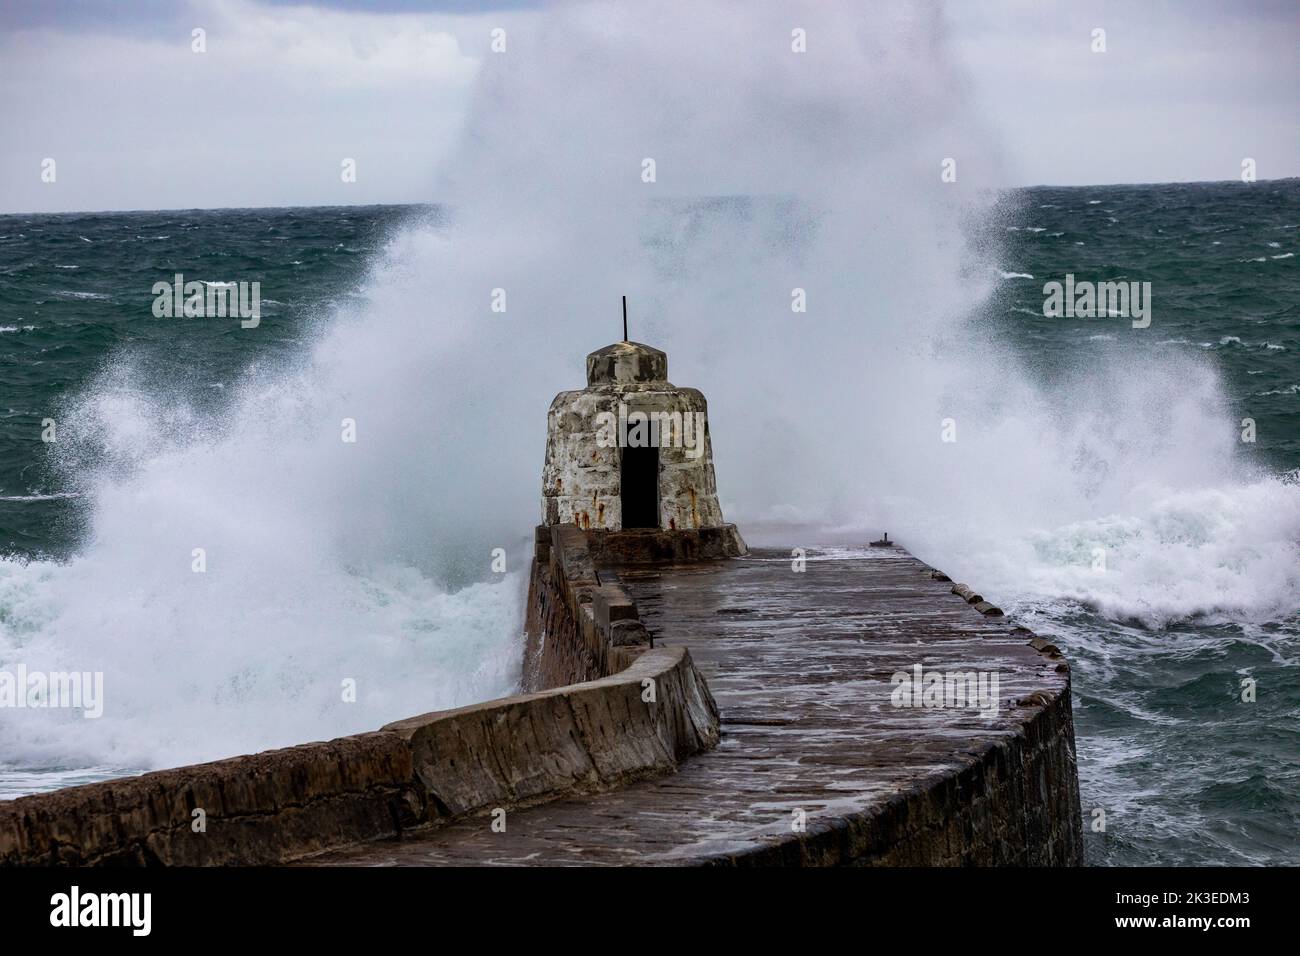 Portreath,Cornwall,26th September 2022,Strong North westerly winds today brought large waves to Portreath in Cornwall. Surfers enjoyed riding the high waves which also crashed over the Monkey Hut and sea wall. The weather forecast is for 15C and strong winds for the rest of the day.Credit: Keith Larby/Alamy Live News Stock Photo